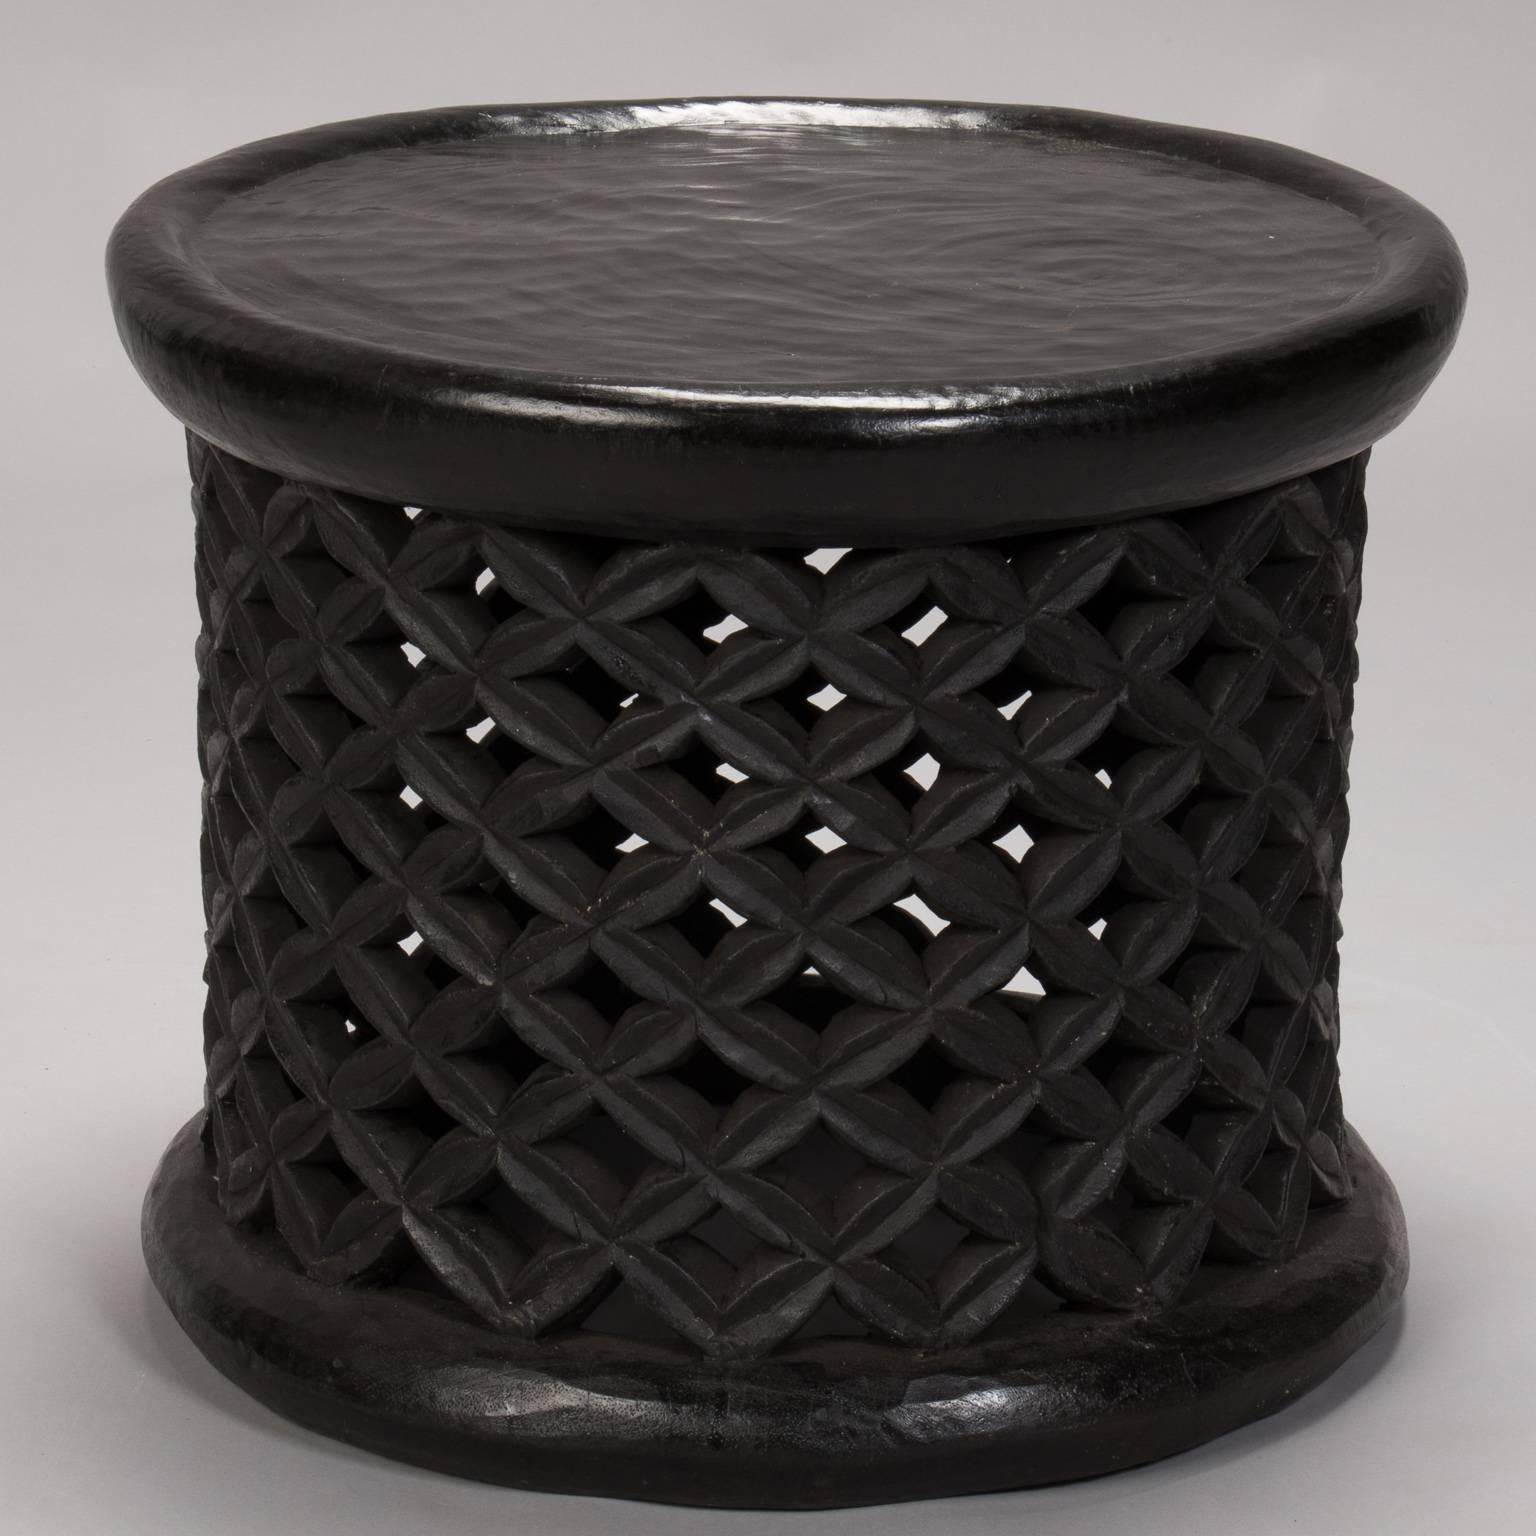 Dark stained hand-carved wooden table or stool from Bameleke people in Cameroon has a round top and base with open work grid pattern on the sides, circa 1960s. Other similar stools or tables available in slightly different sizes/styles also